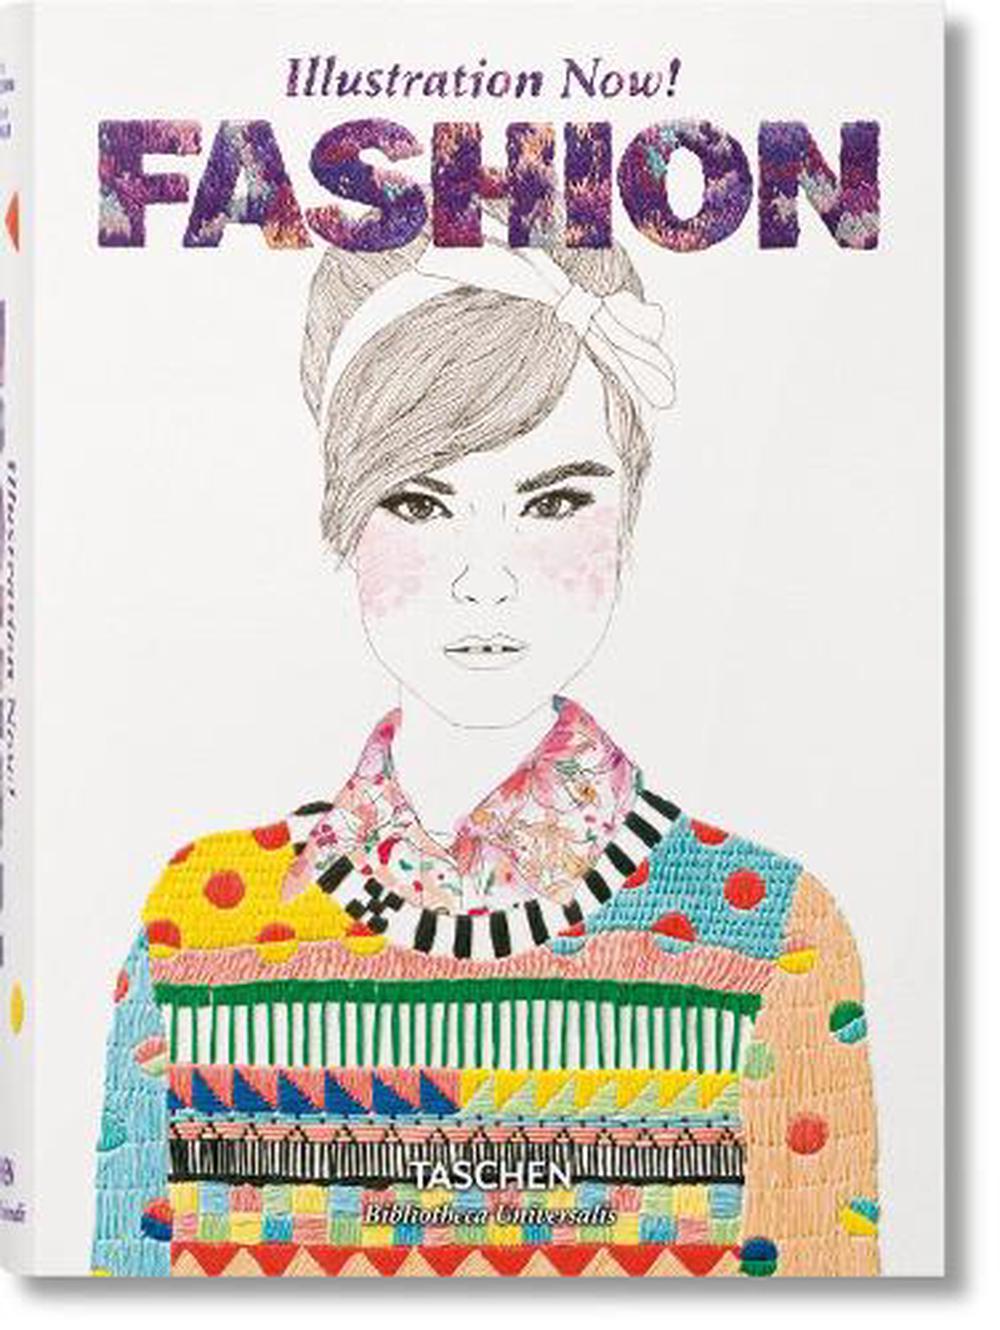 Illustration Now! Fashion by Taschen, Hardcover, 9783836567312 | Buy ...